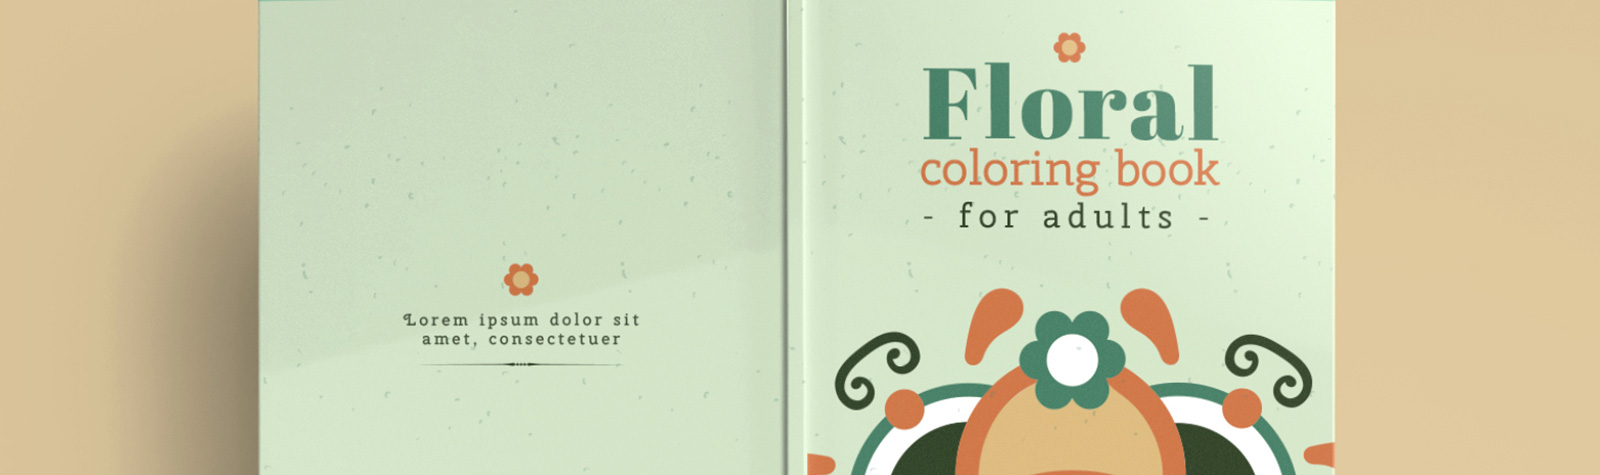 How to Create a Coloring Book for KDP with Ready-made Designs - Vexels Blog